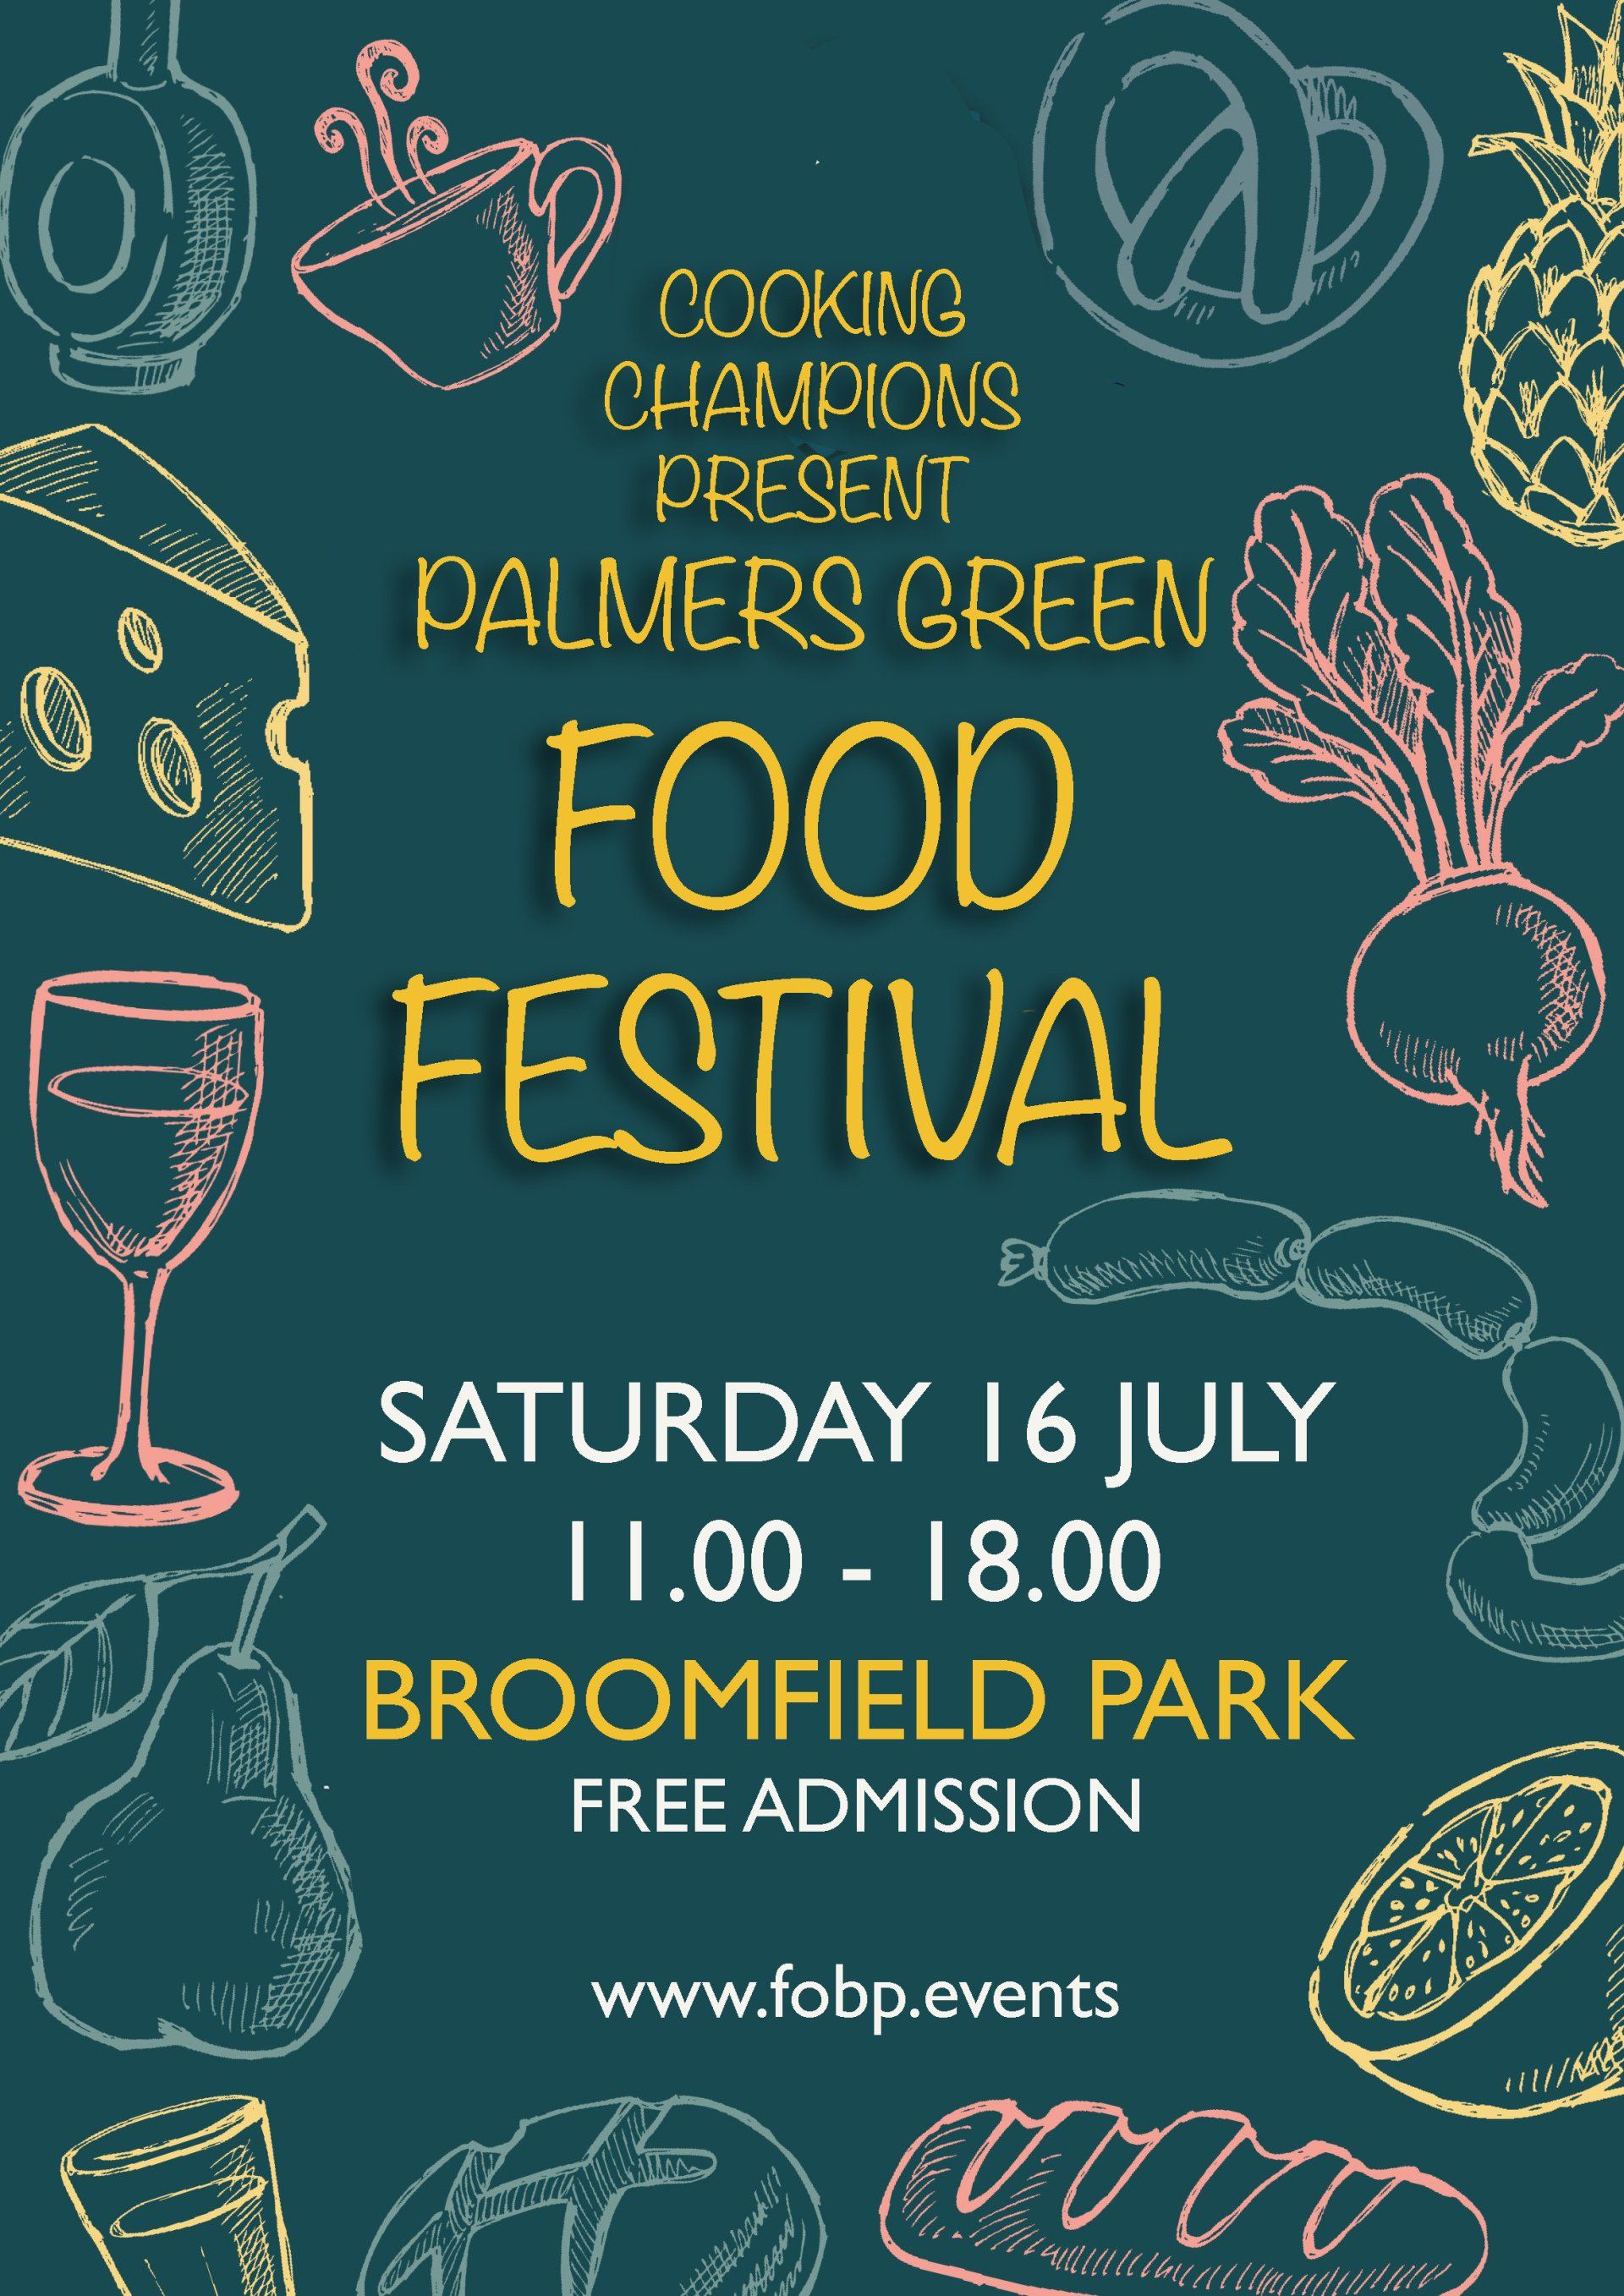 A poster for a food festival in broomfield park